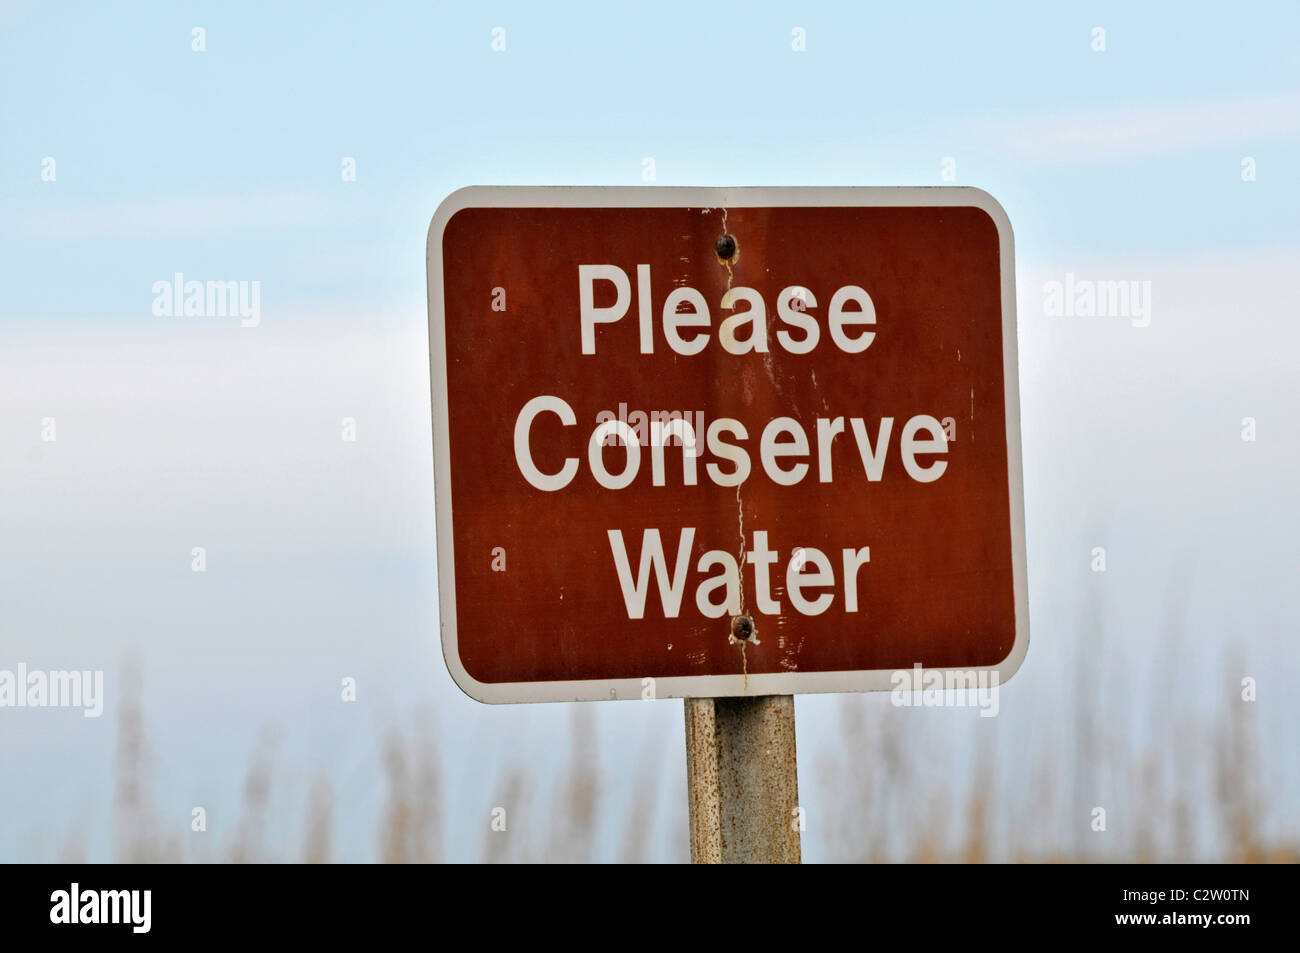 Conserve Water sign. Fort de Soto, Florida, USA Stock Photo